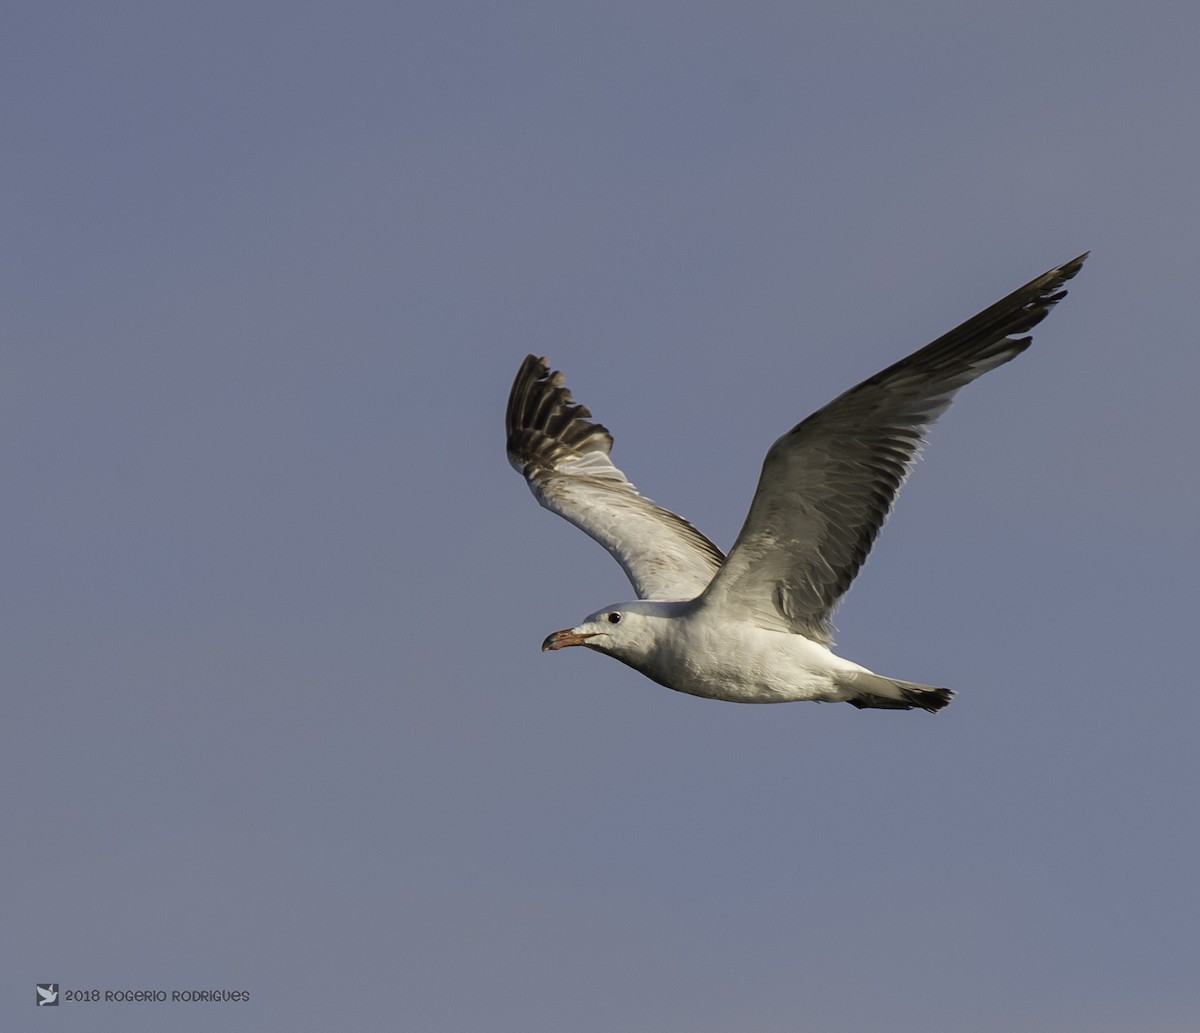 Audouin's Gull - Rogério Rodrigues